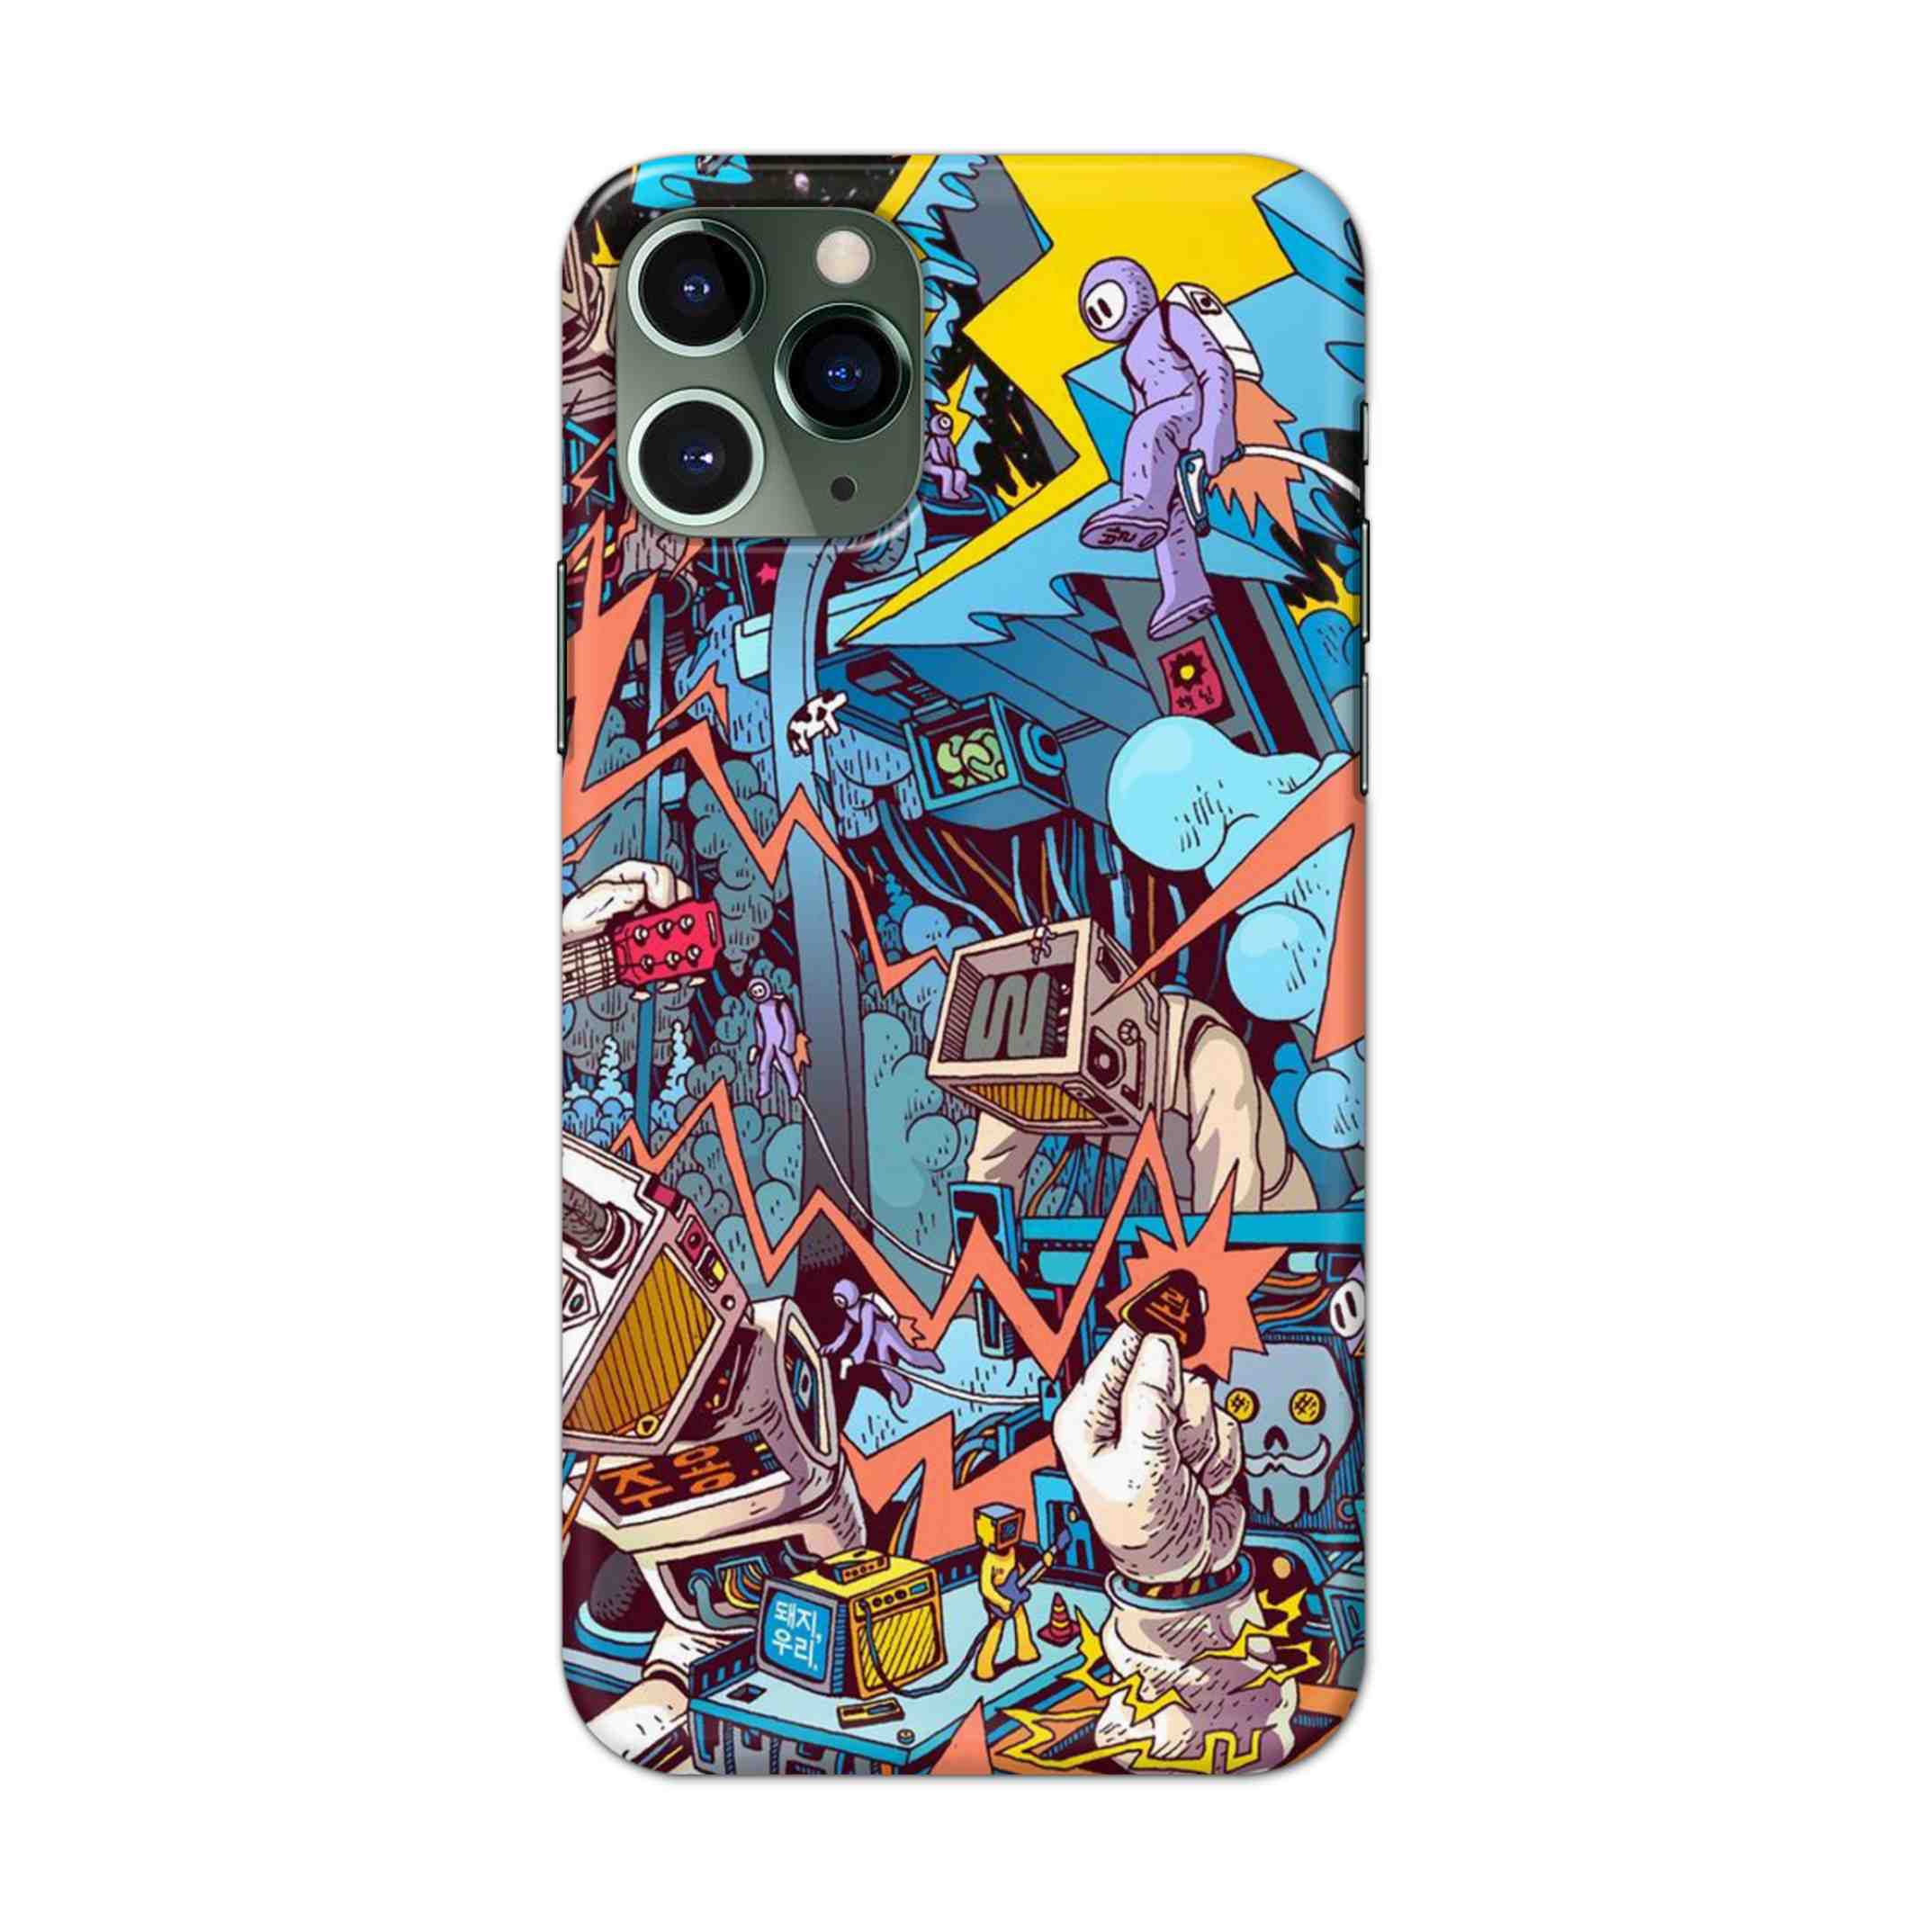 Buy Ofo Panic Hard Back Mobile Phone Case/Cover For iPhone 11 Pro Max Online